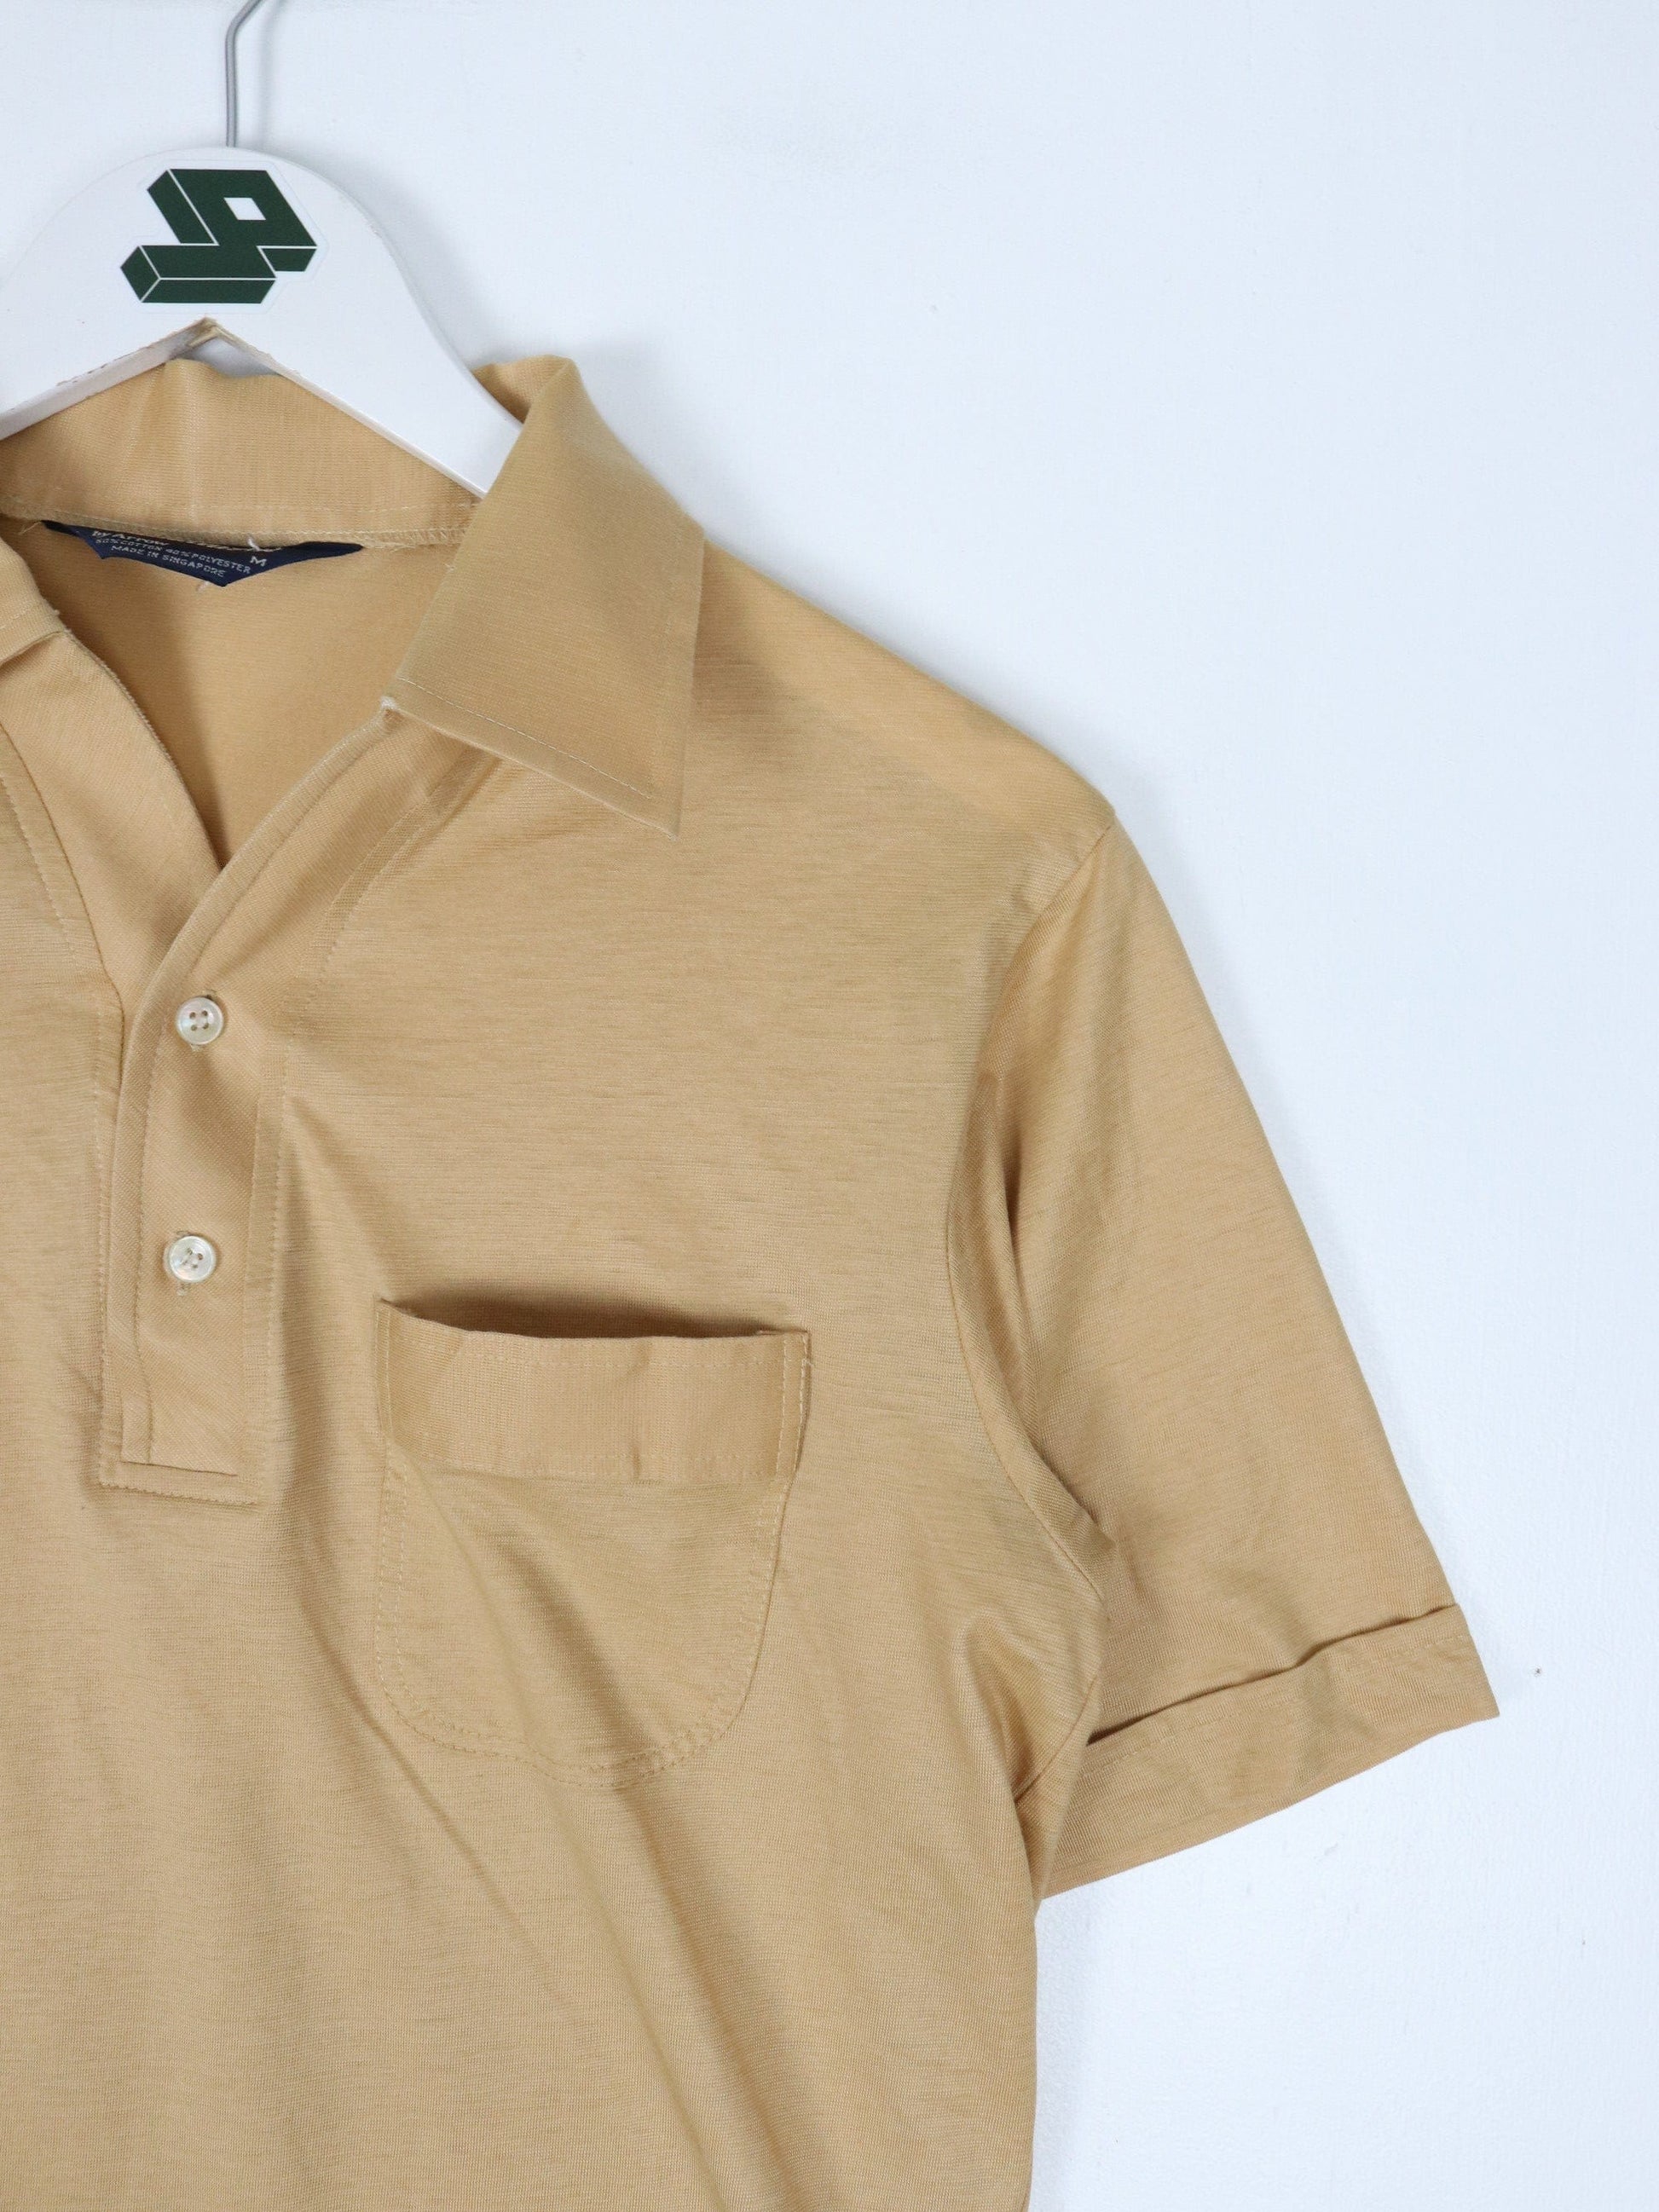 Other Button Up Shirts Vintage Tournament By Arrow Polo Shirt Fits Mens Small Brown Lightweight 90s